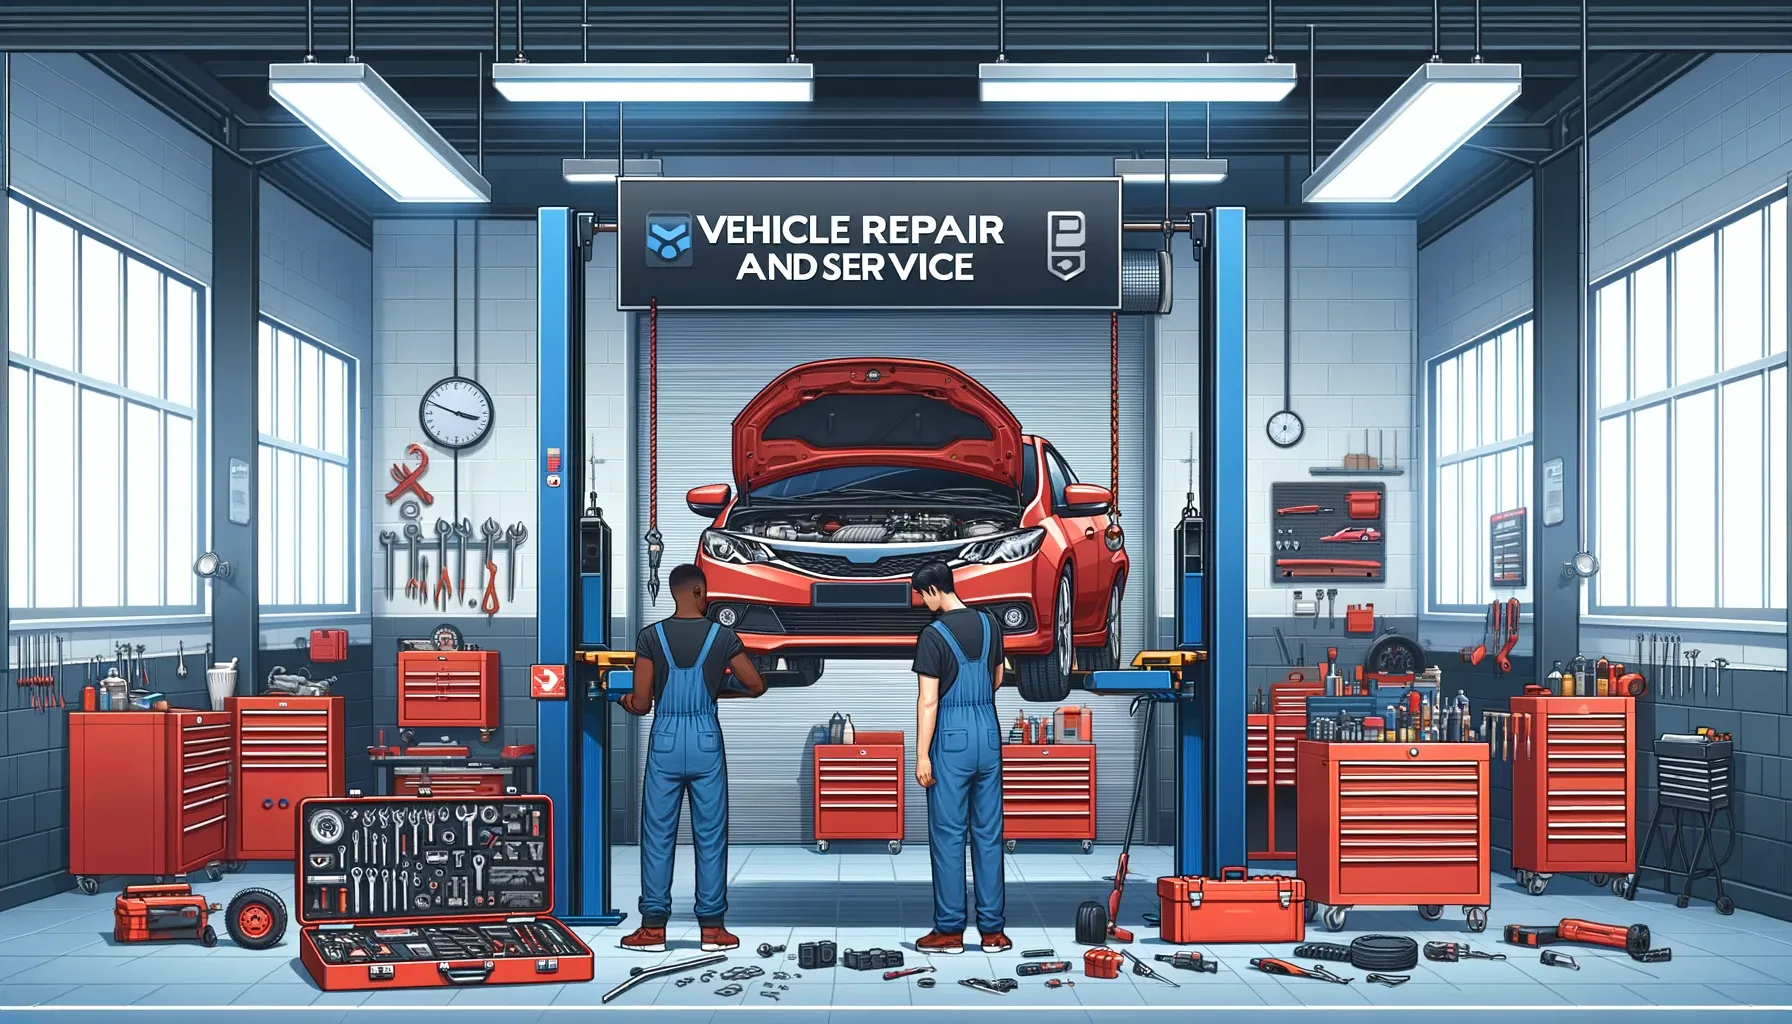 Vehicle Repair and Service